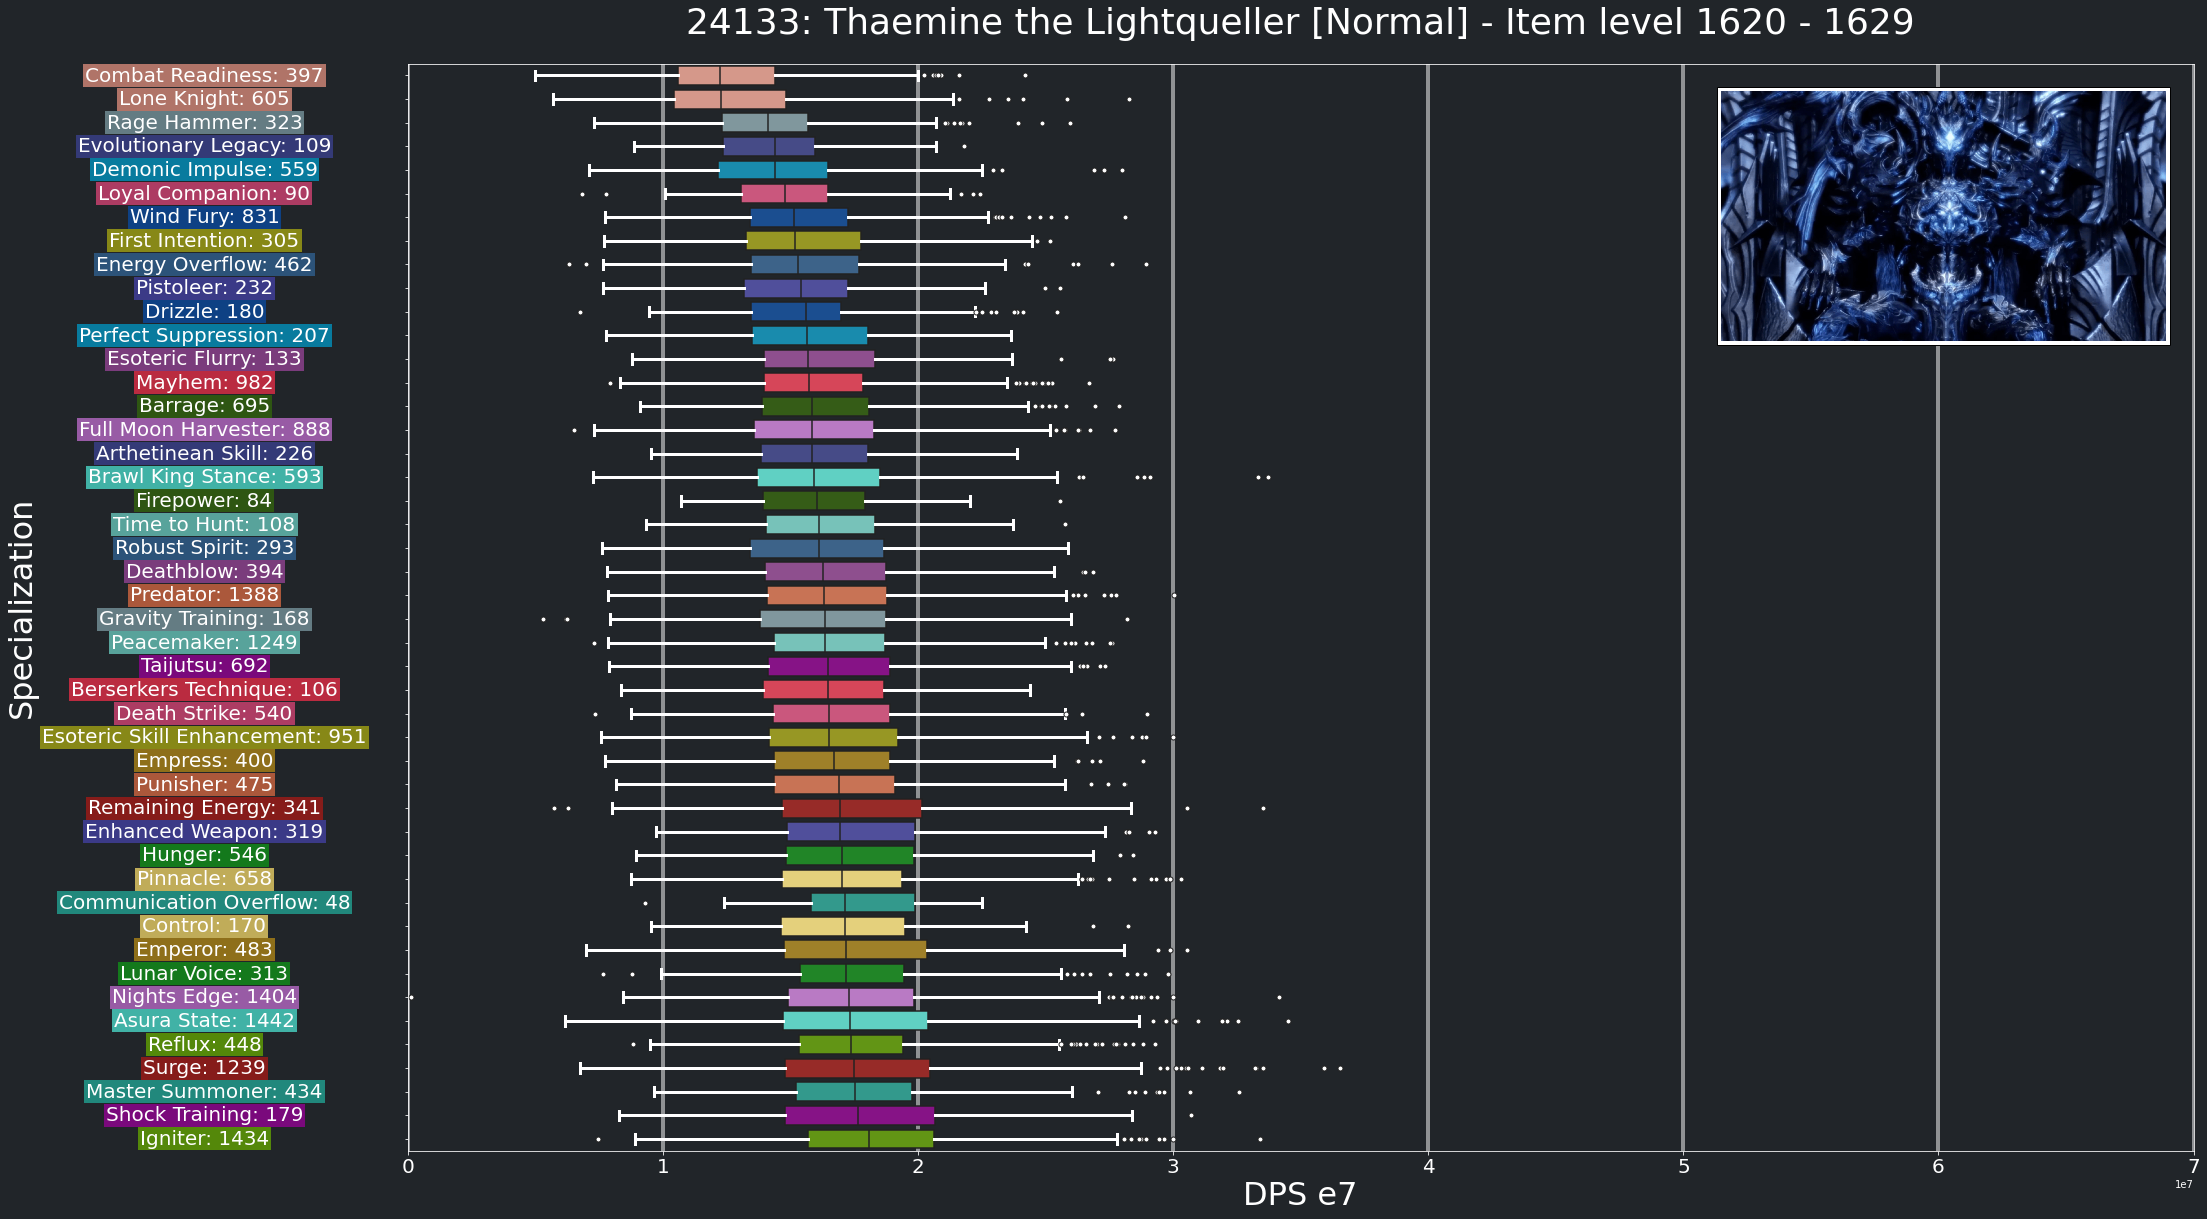 DPS_ThaeminetheLightquellerNormal_1620to1630_Median.png